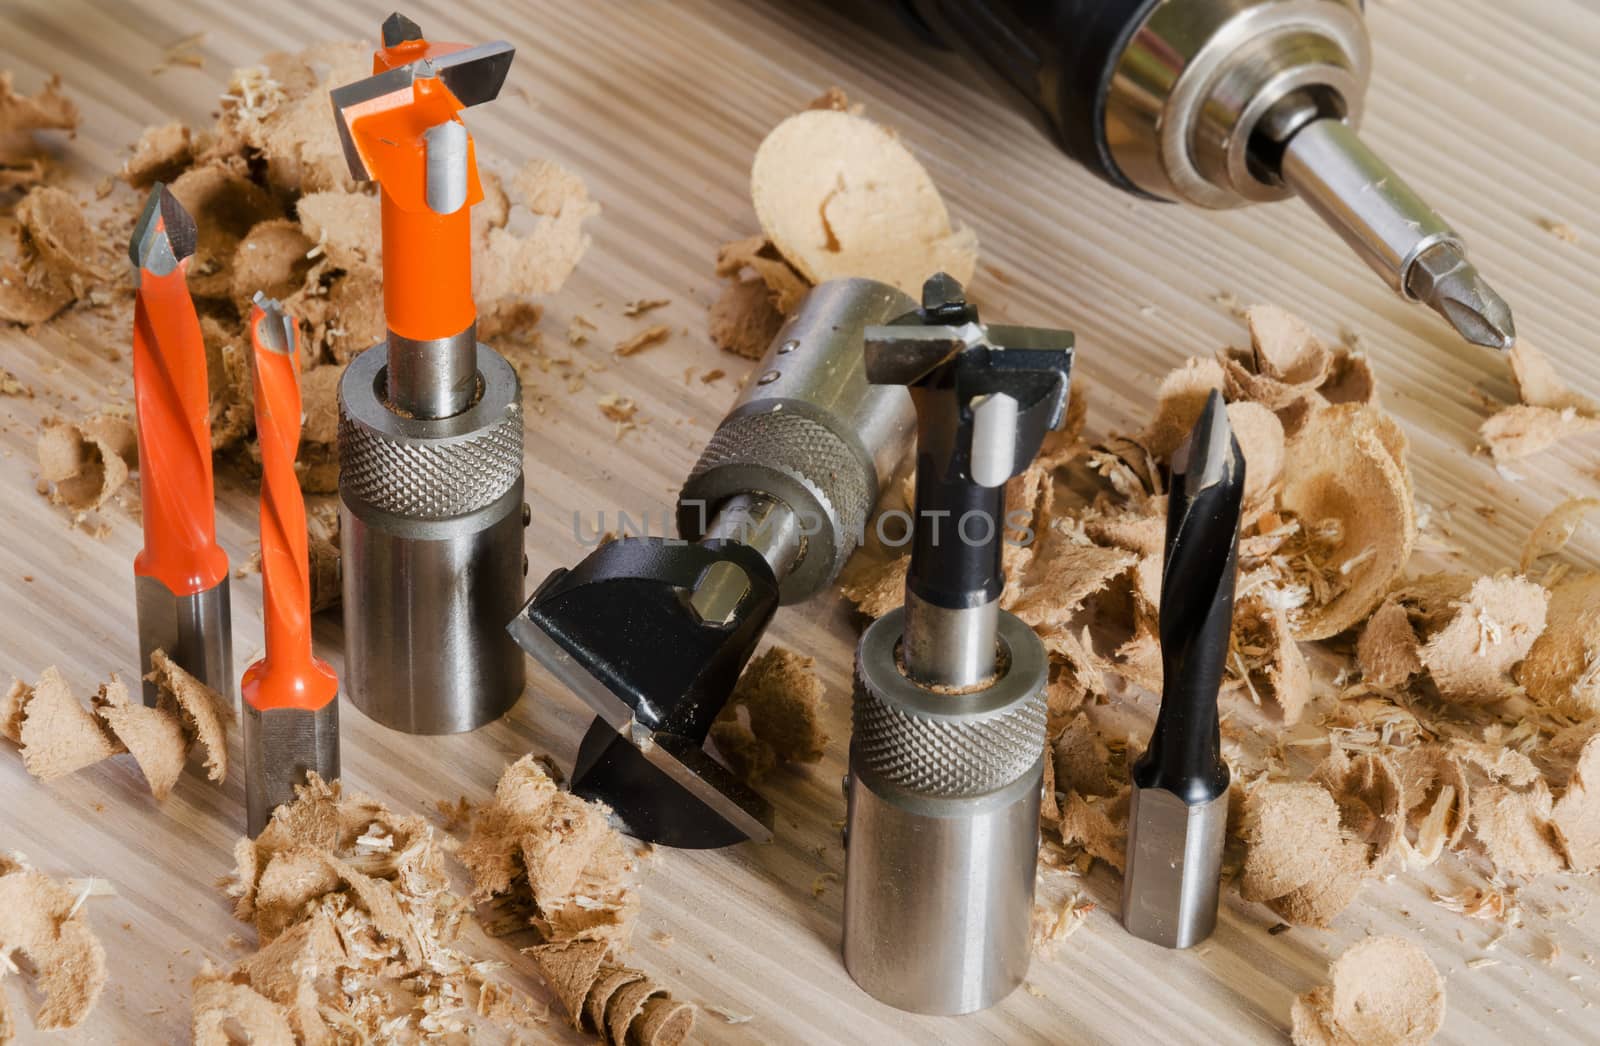 Machine tool cutters and drill bits in the sawdust on wood background